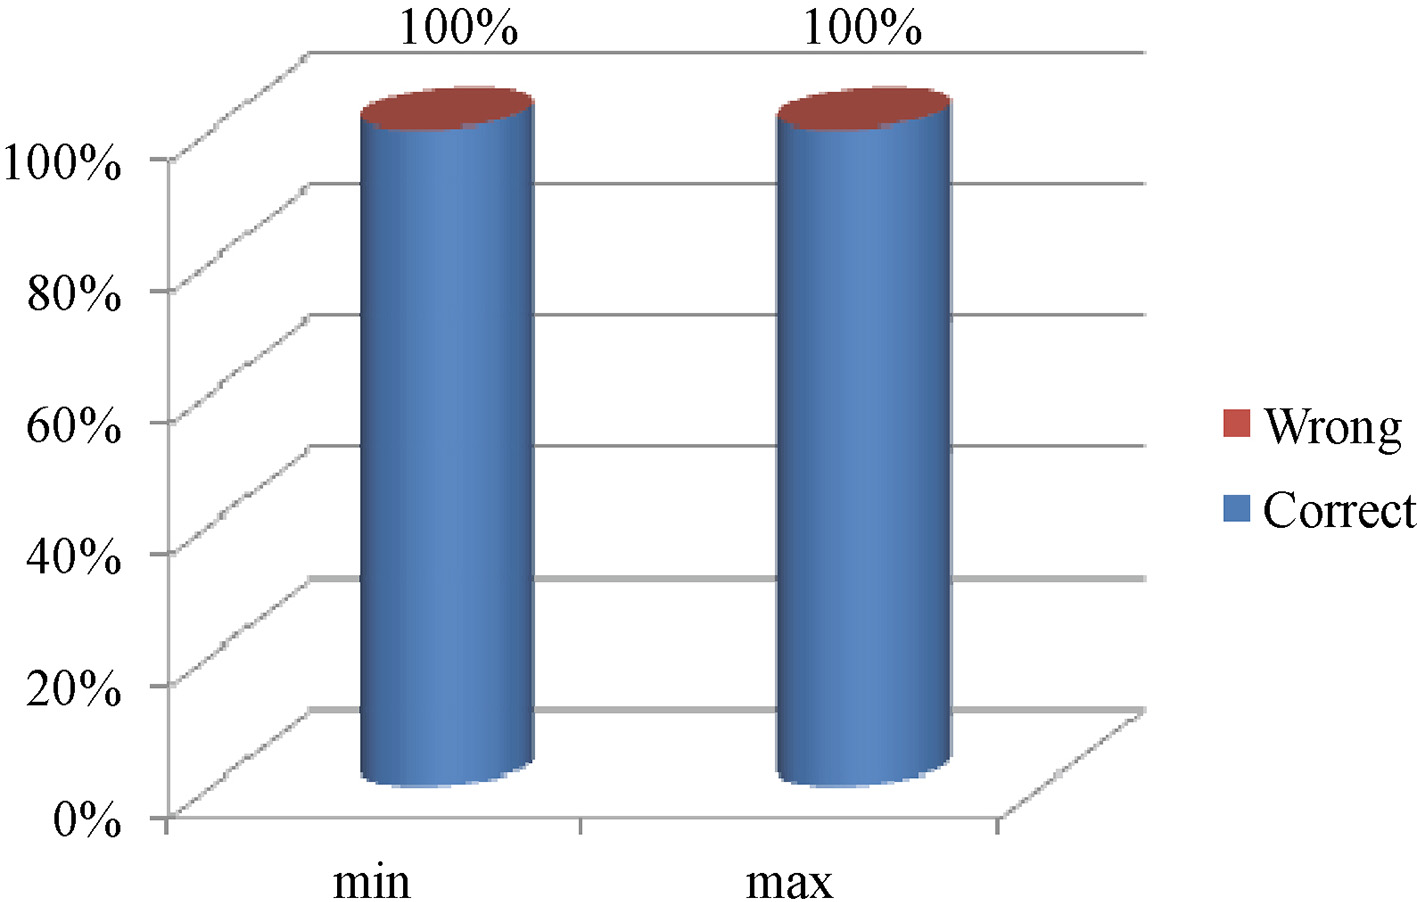 Differential diagnostic accuracy in the case of max and min difference (min = minimum difference, max = maximum difference).